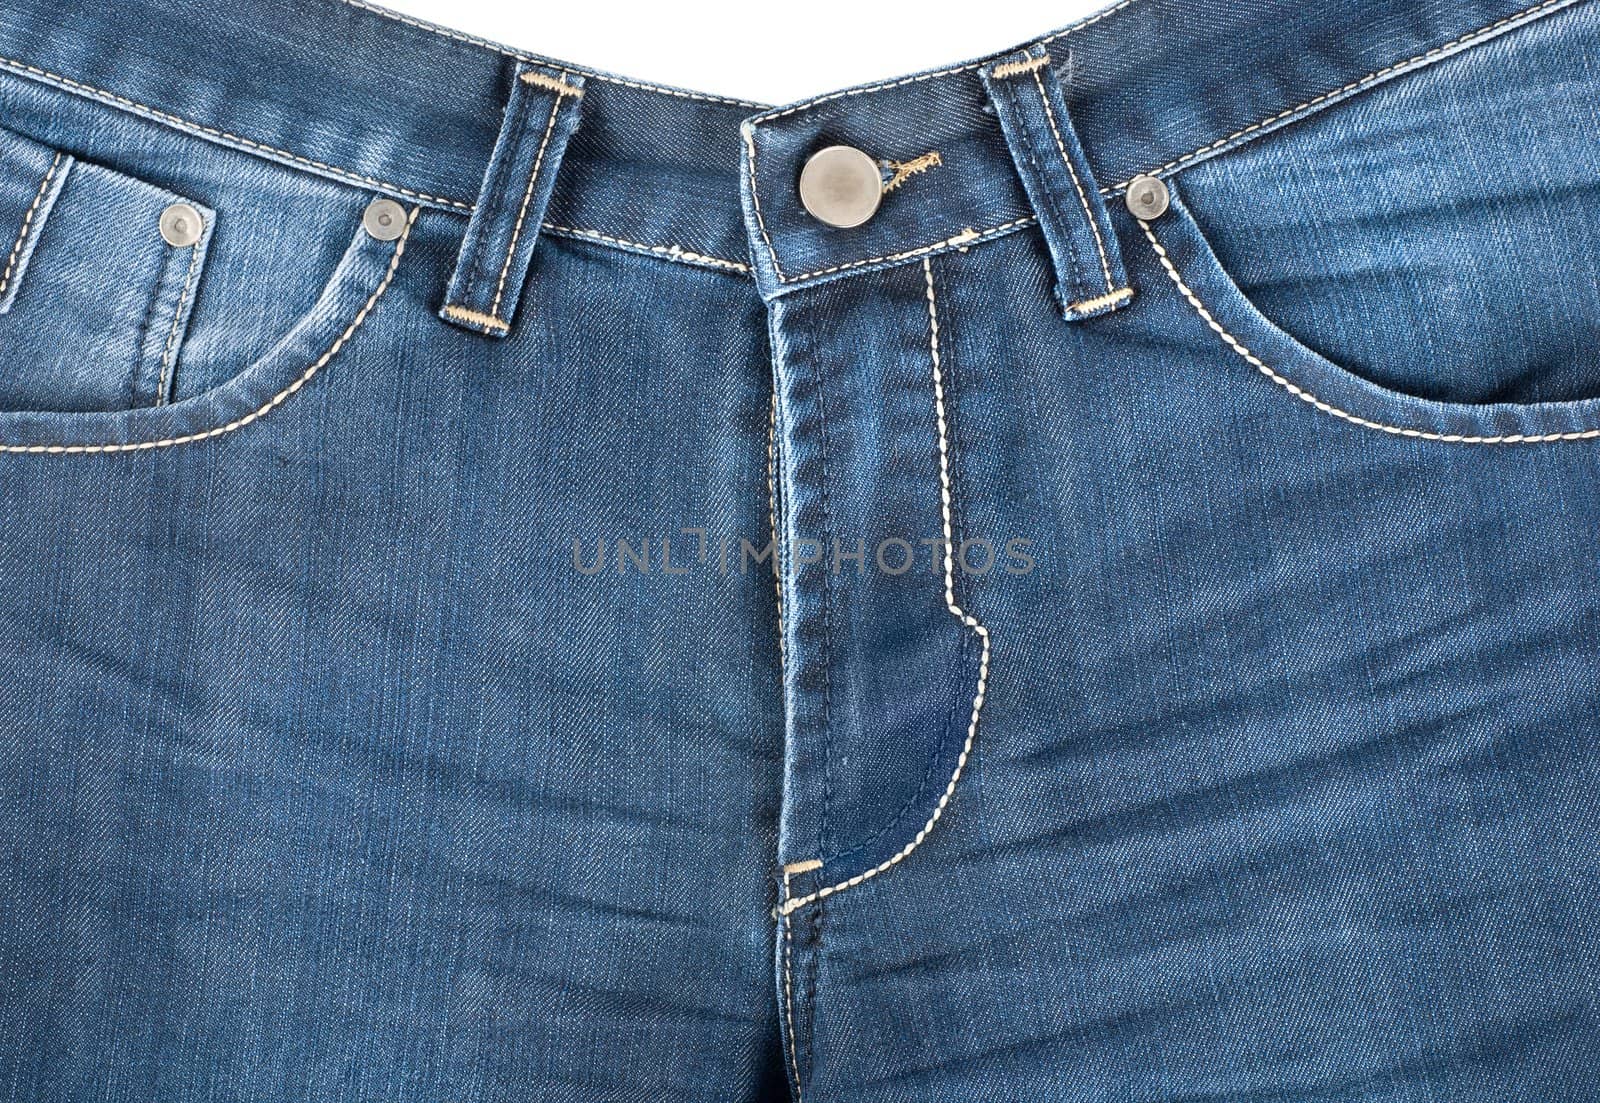 Texture background of blue jeans and pockets